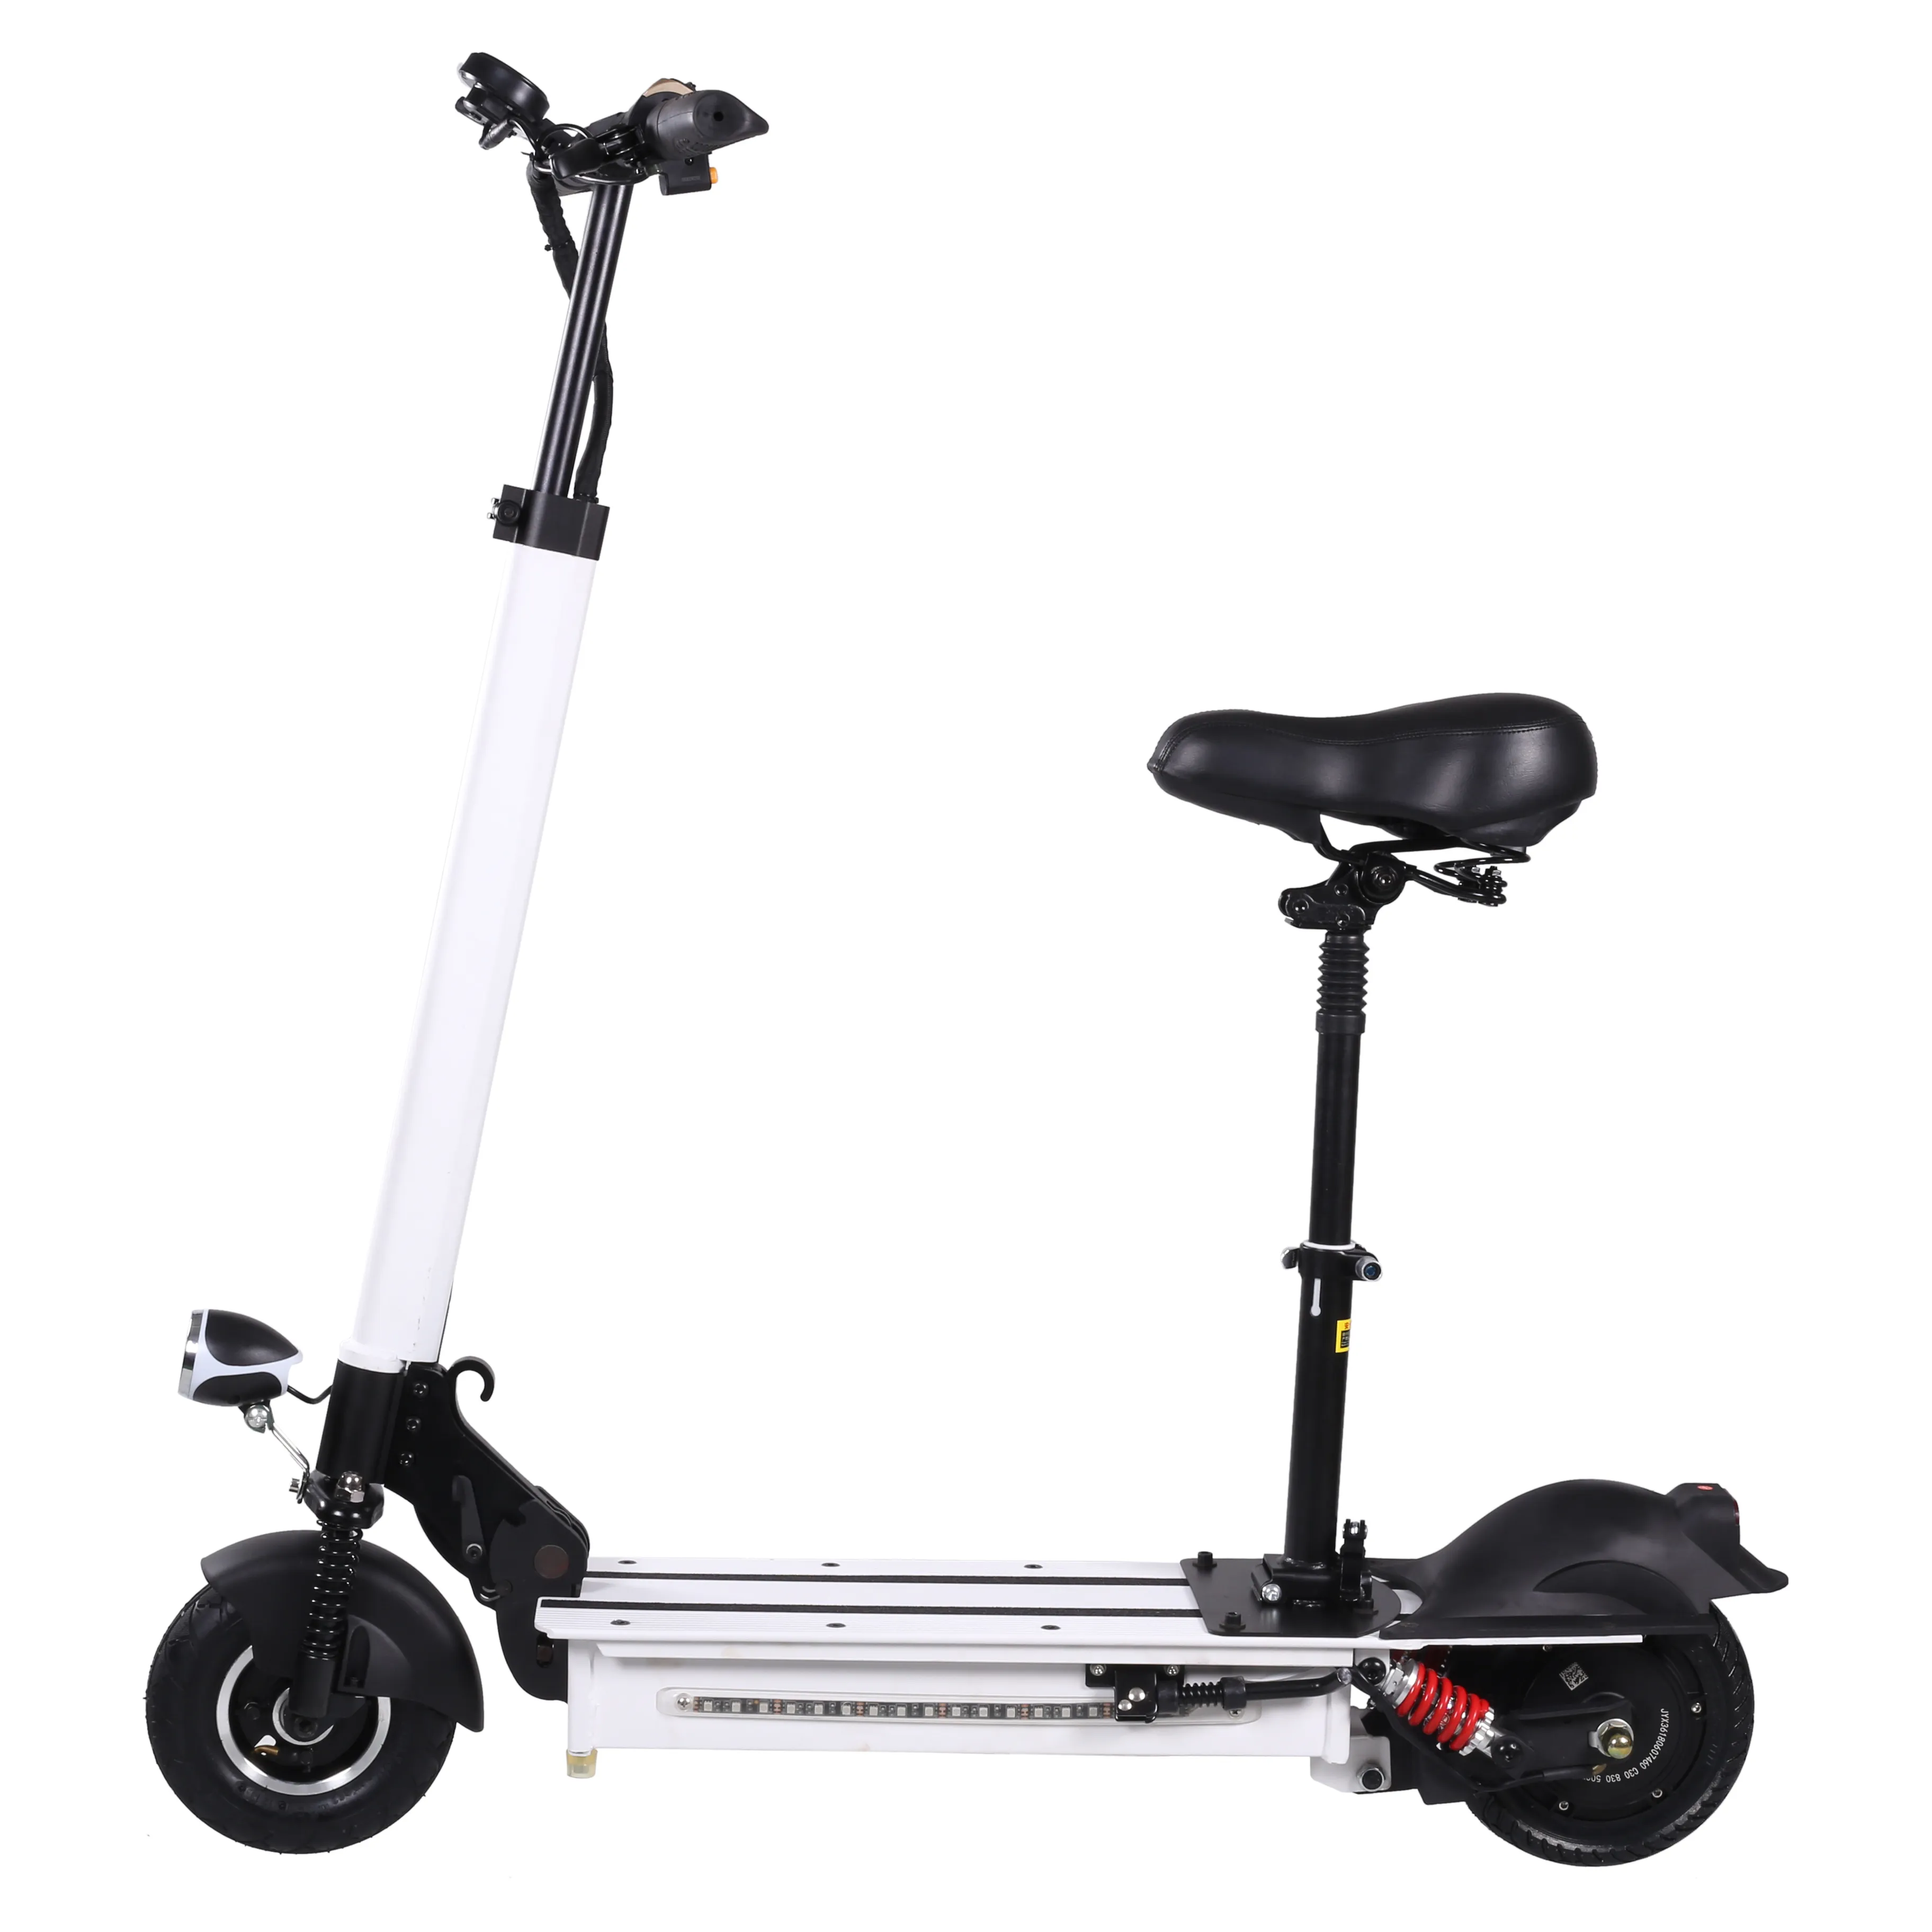 8inch tyre 350w foldable electric scooter for adult with front and rear suspension